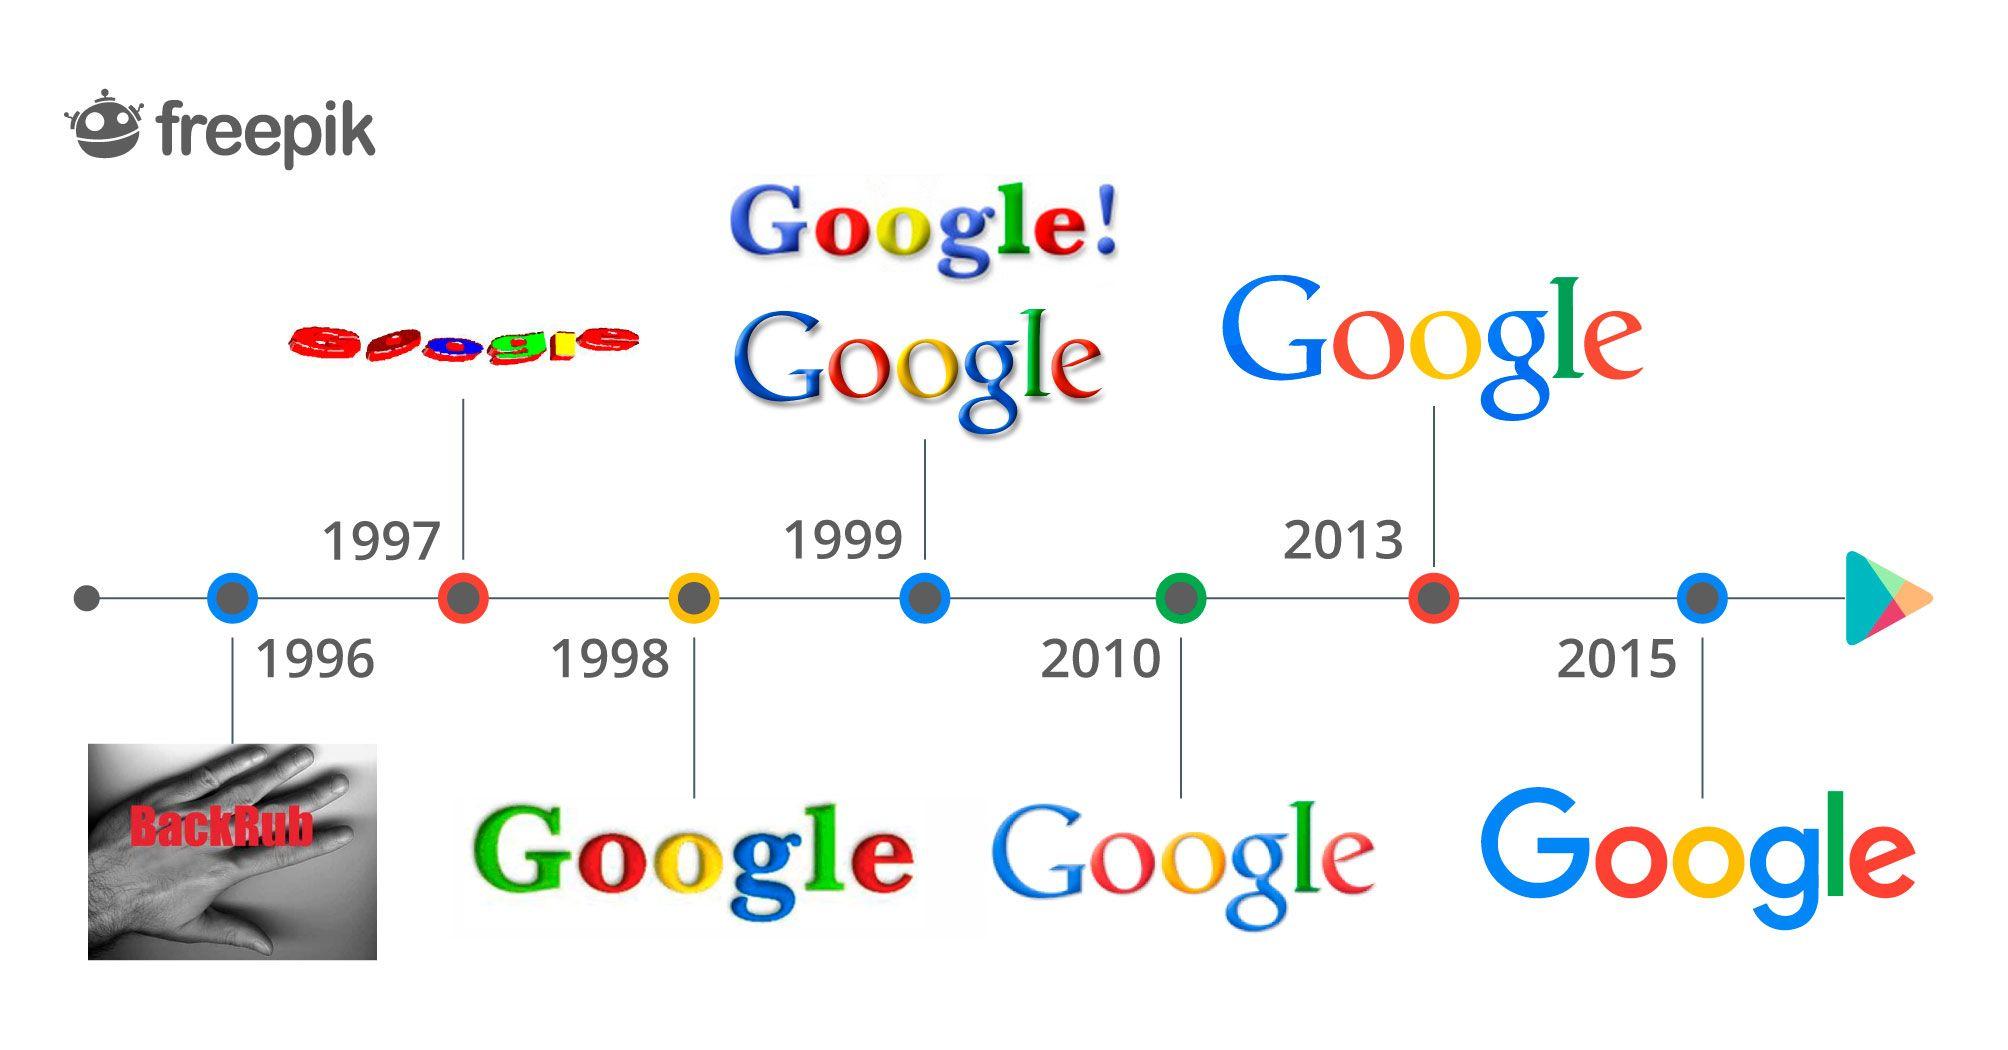 1999 Google Logo - The evolution of Google logo as well as its Play Store logo